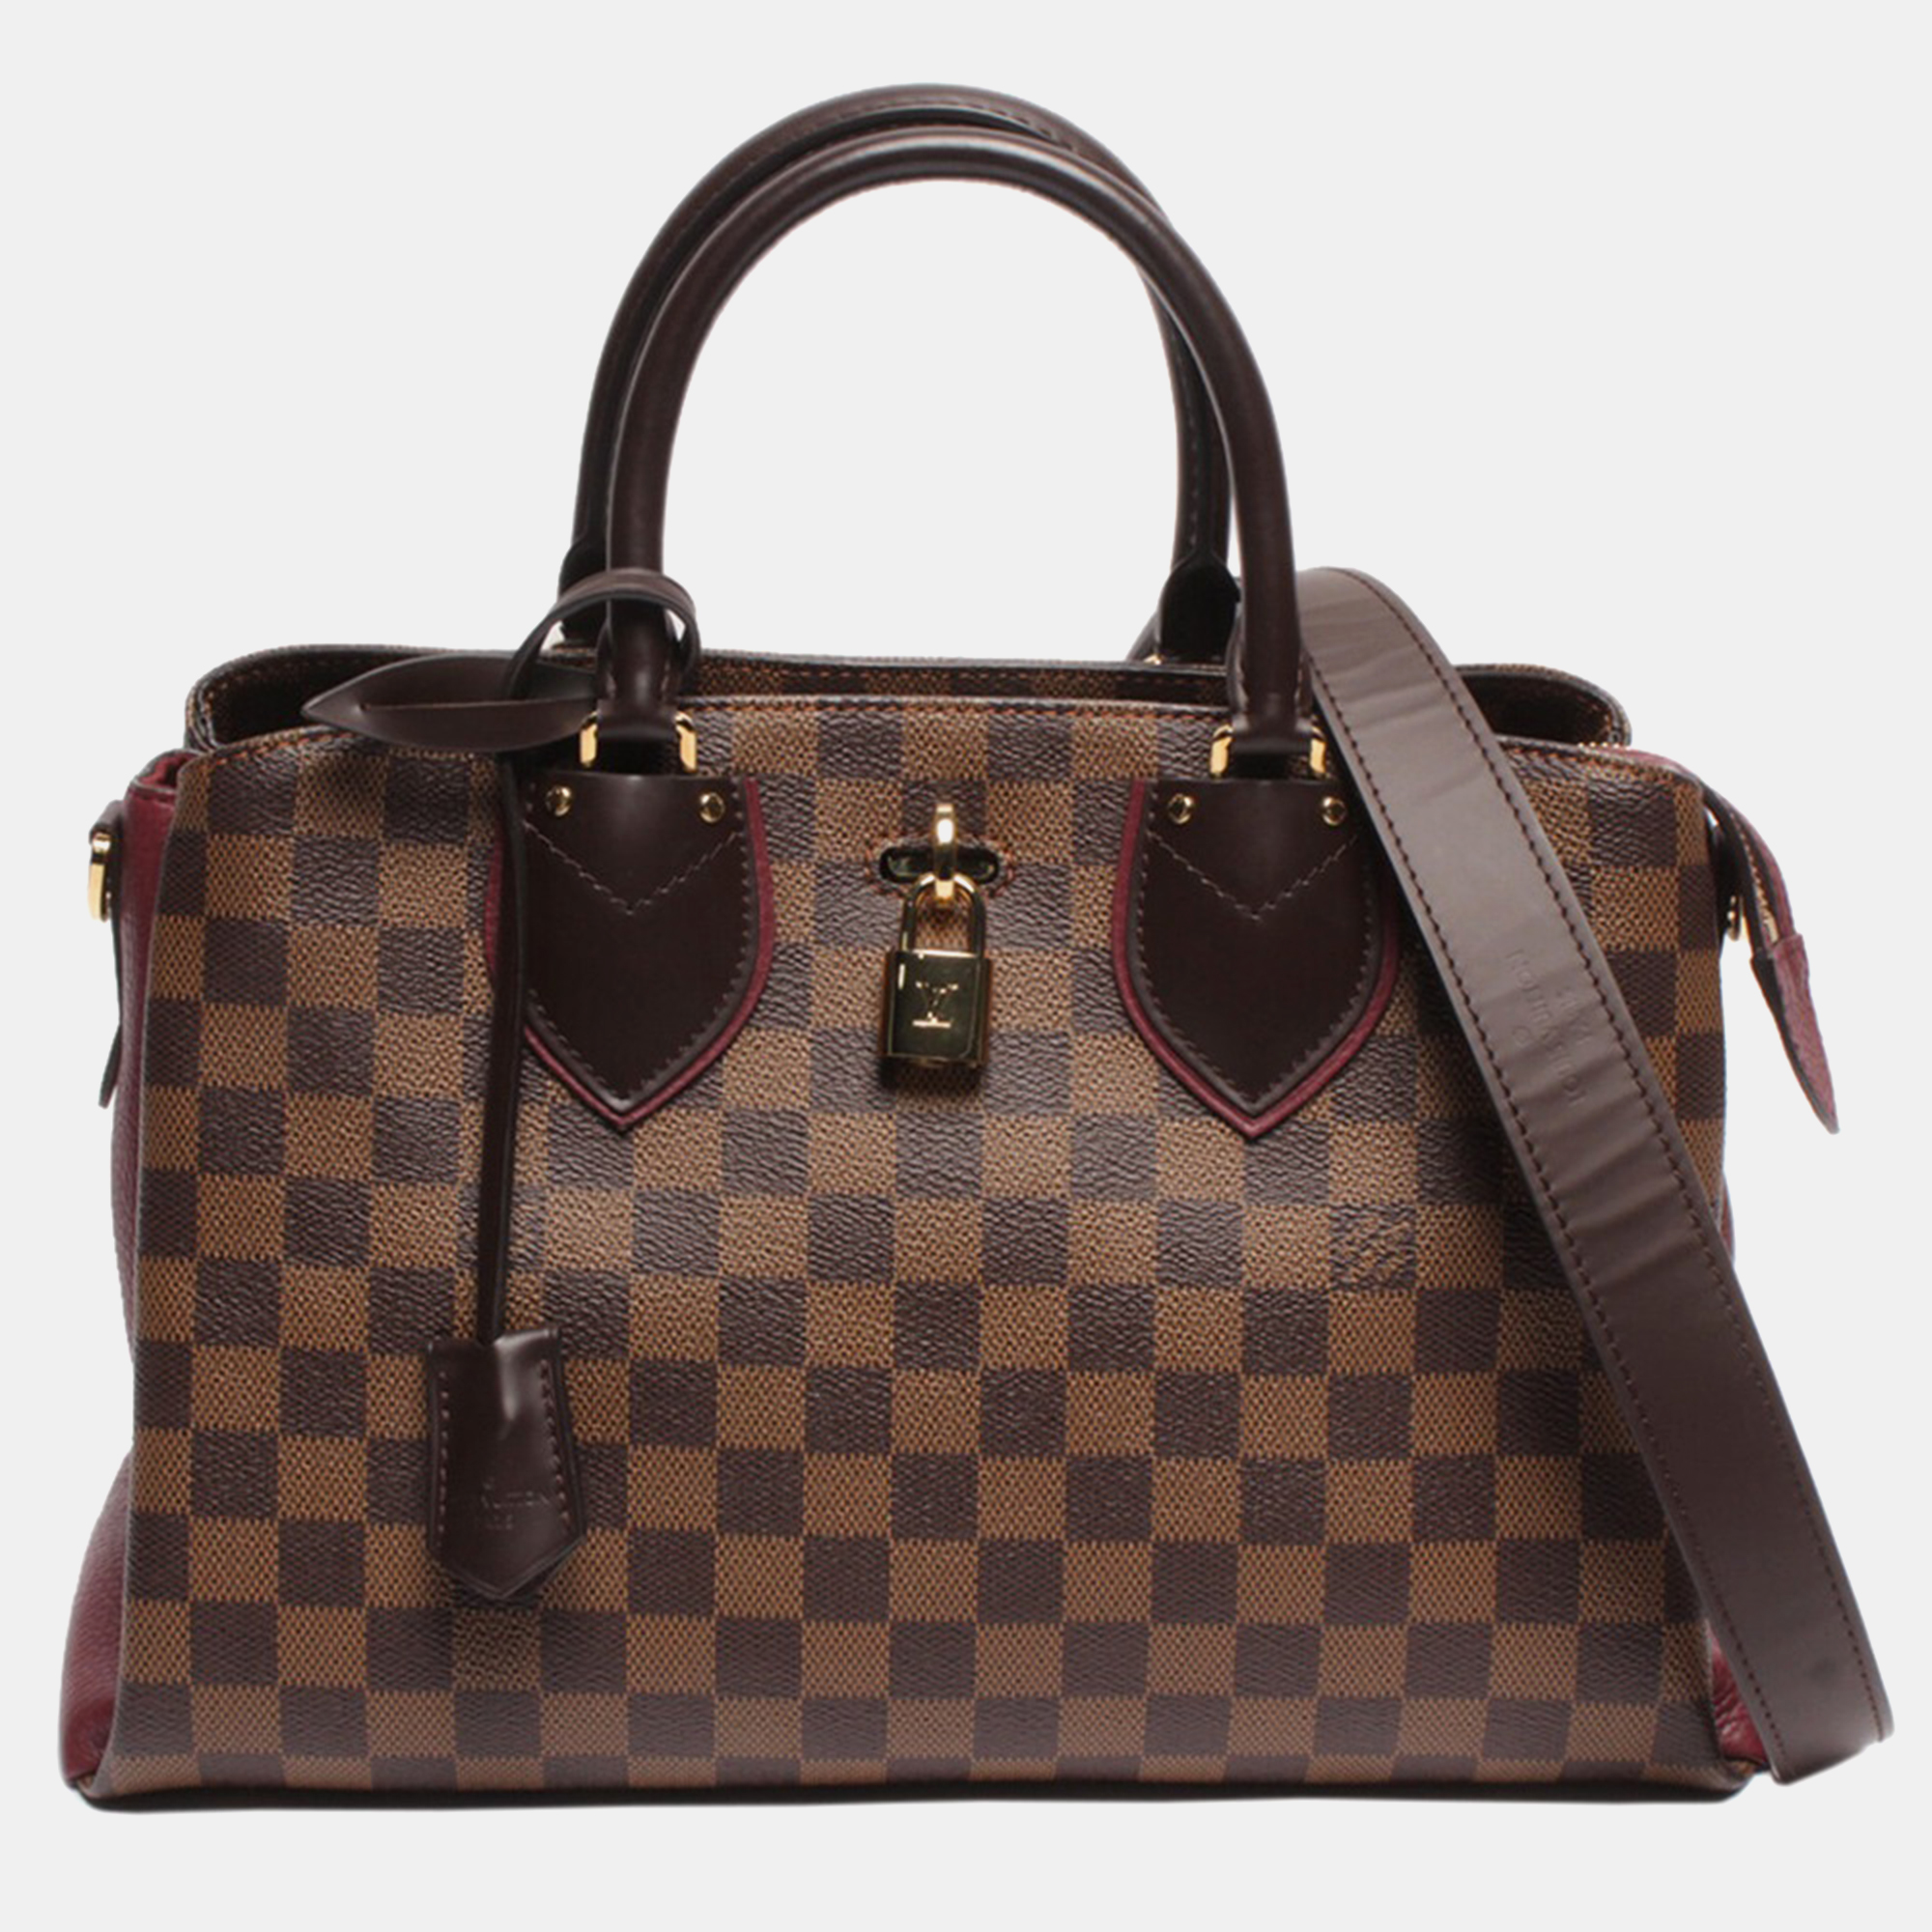 Louis vuitton brown canvas, leather normandy tote